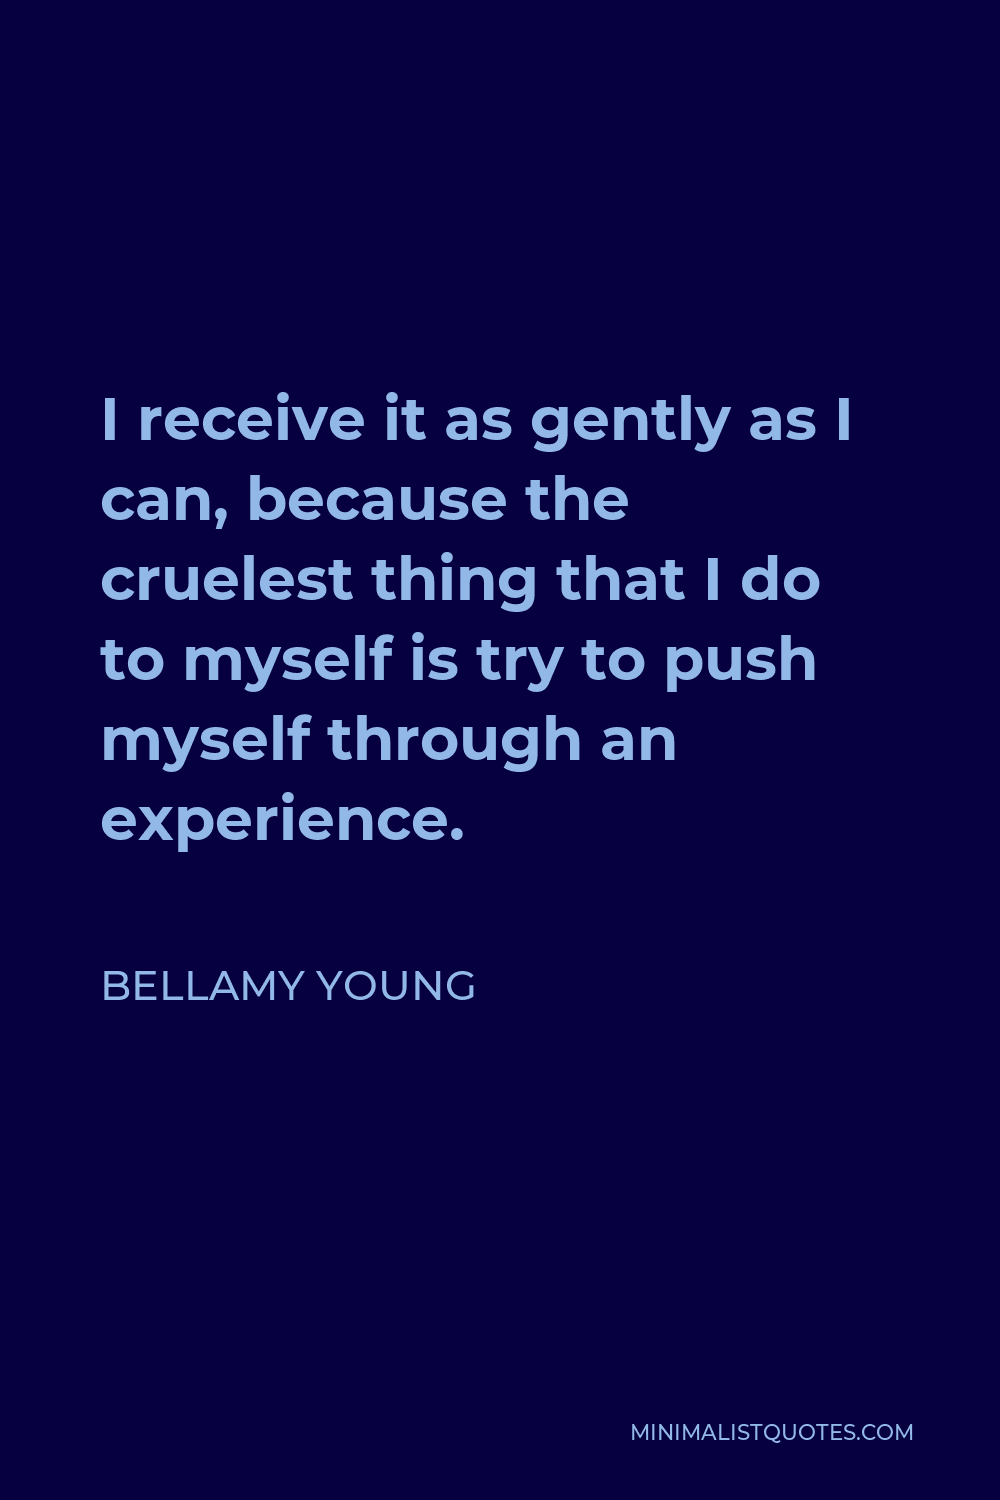 Bellamy Young Quote - I receive it as gently as I can, because the cruelest thing that I do to myself is try to push myself through an experience.